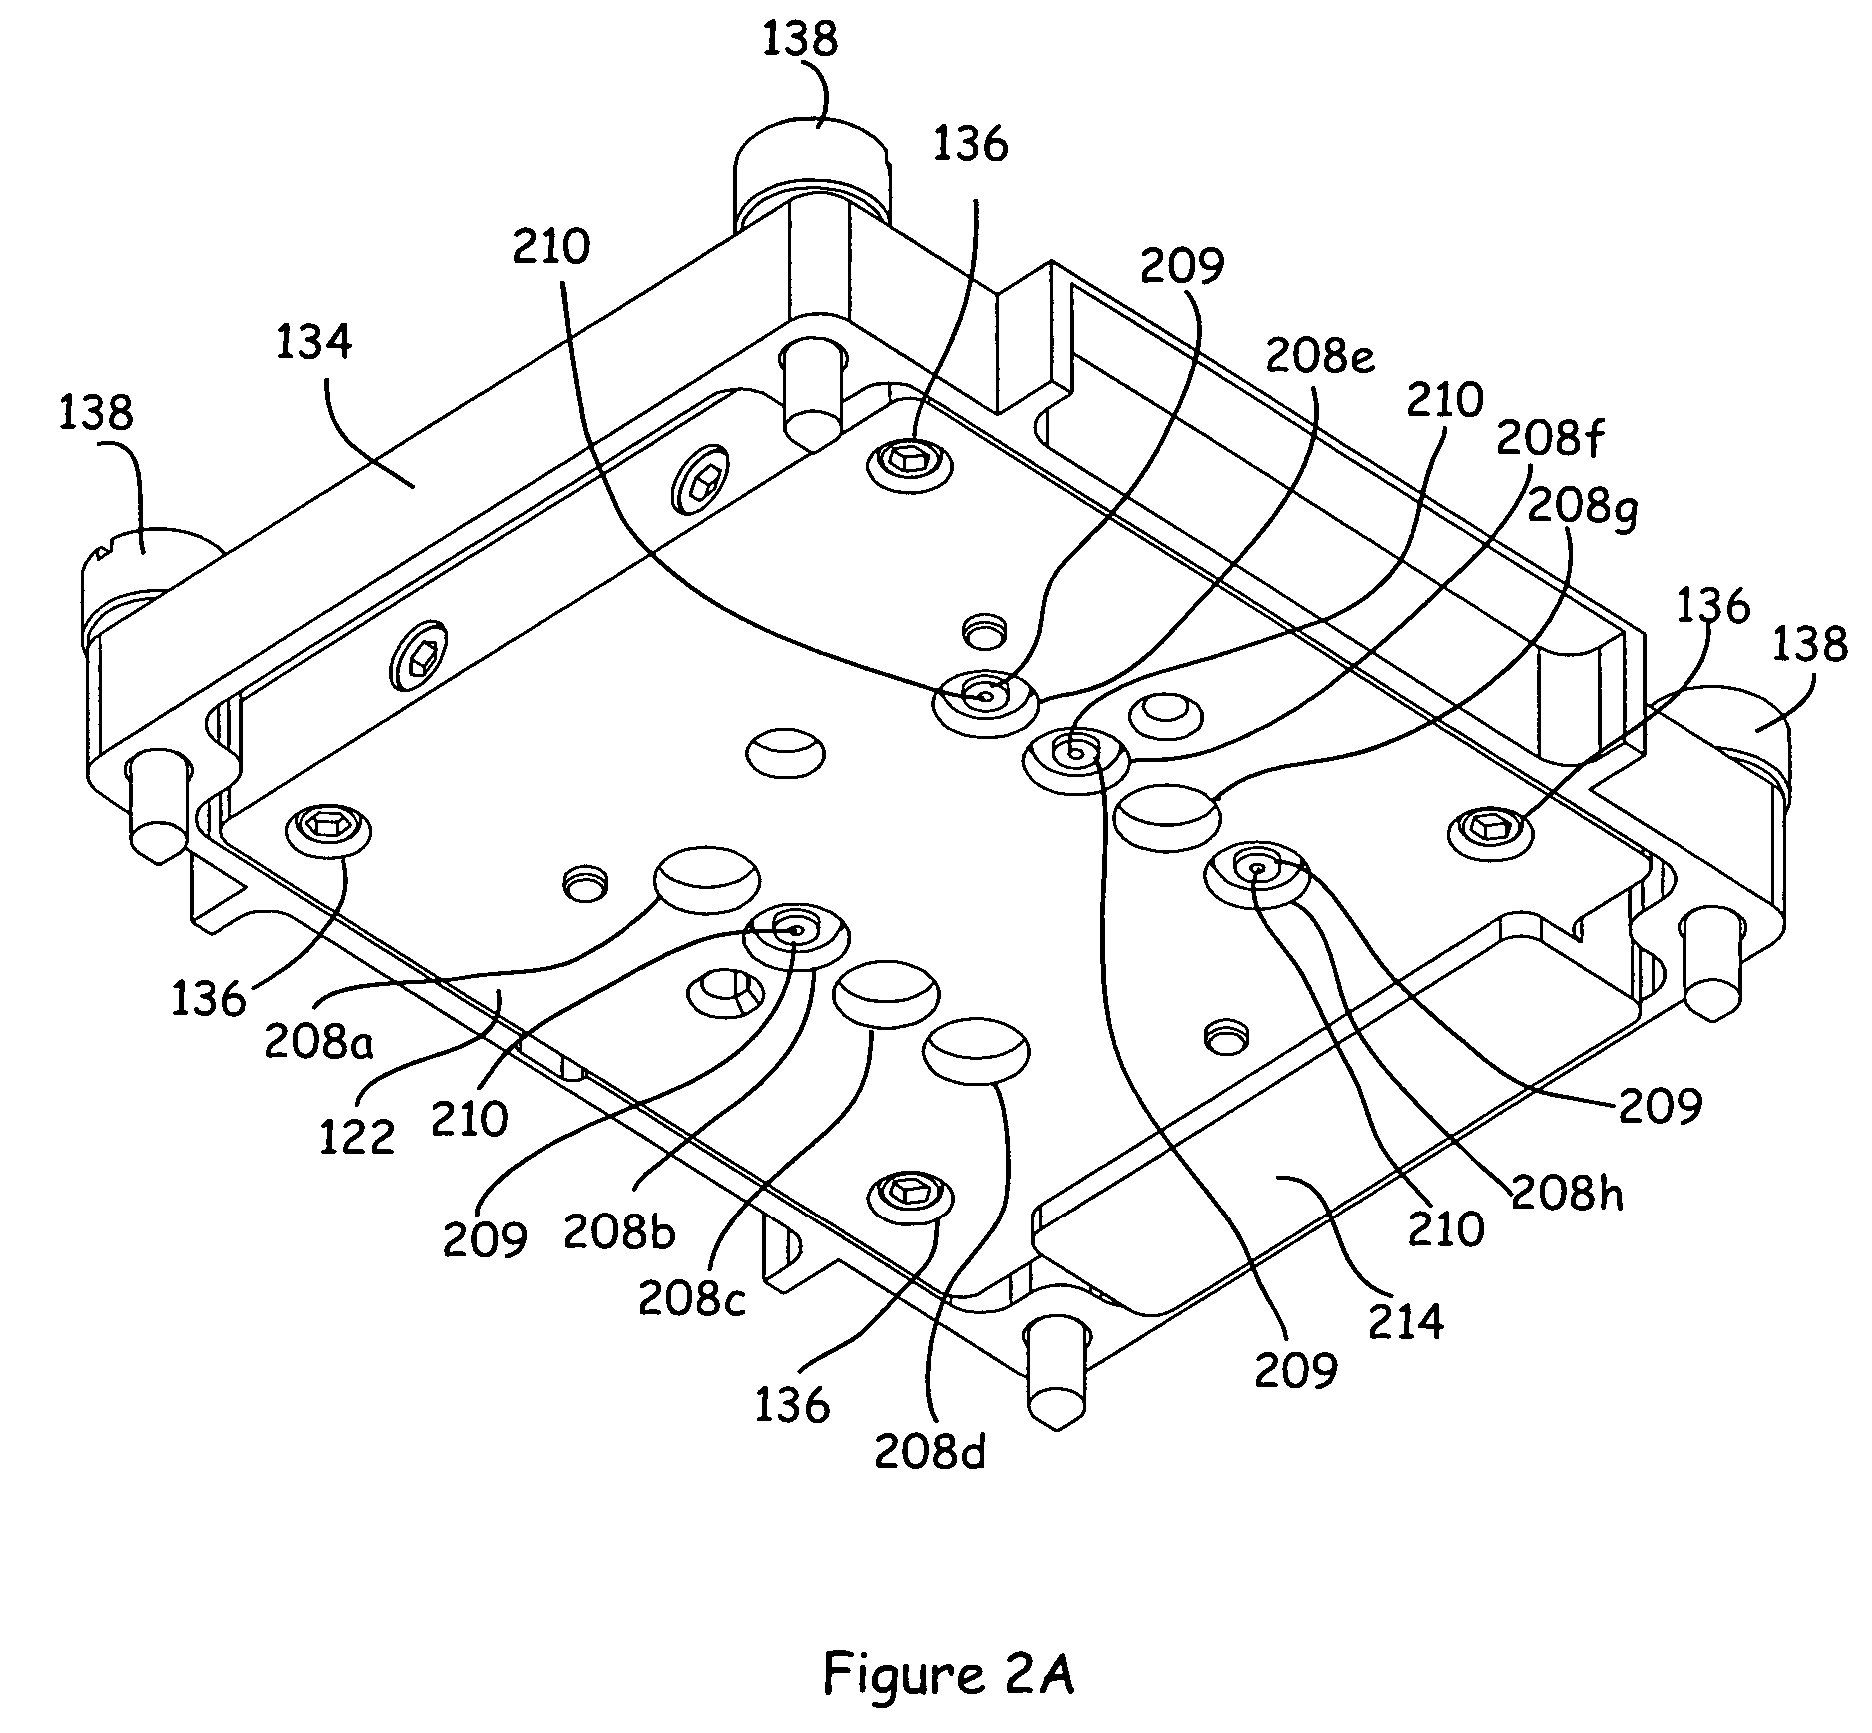 Priming module for microfluidic chips